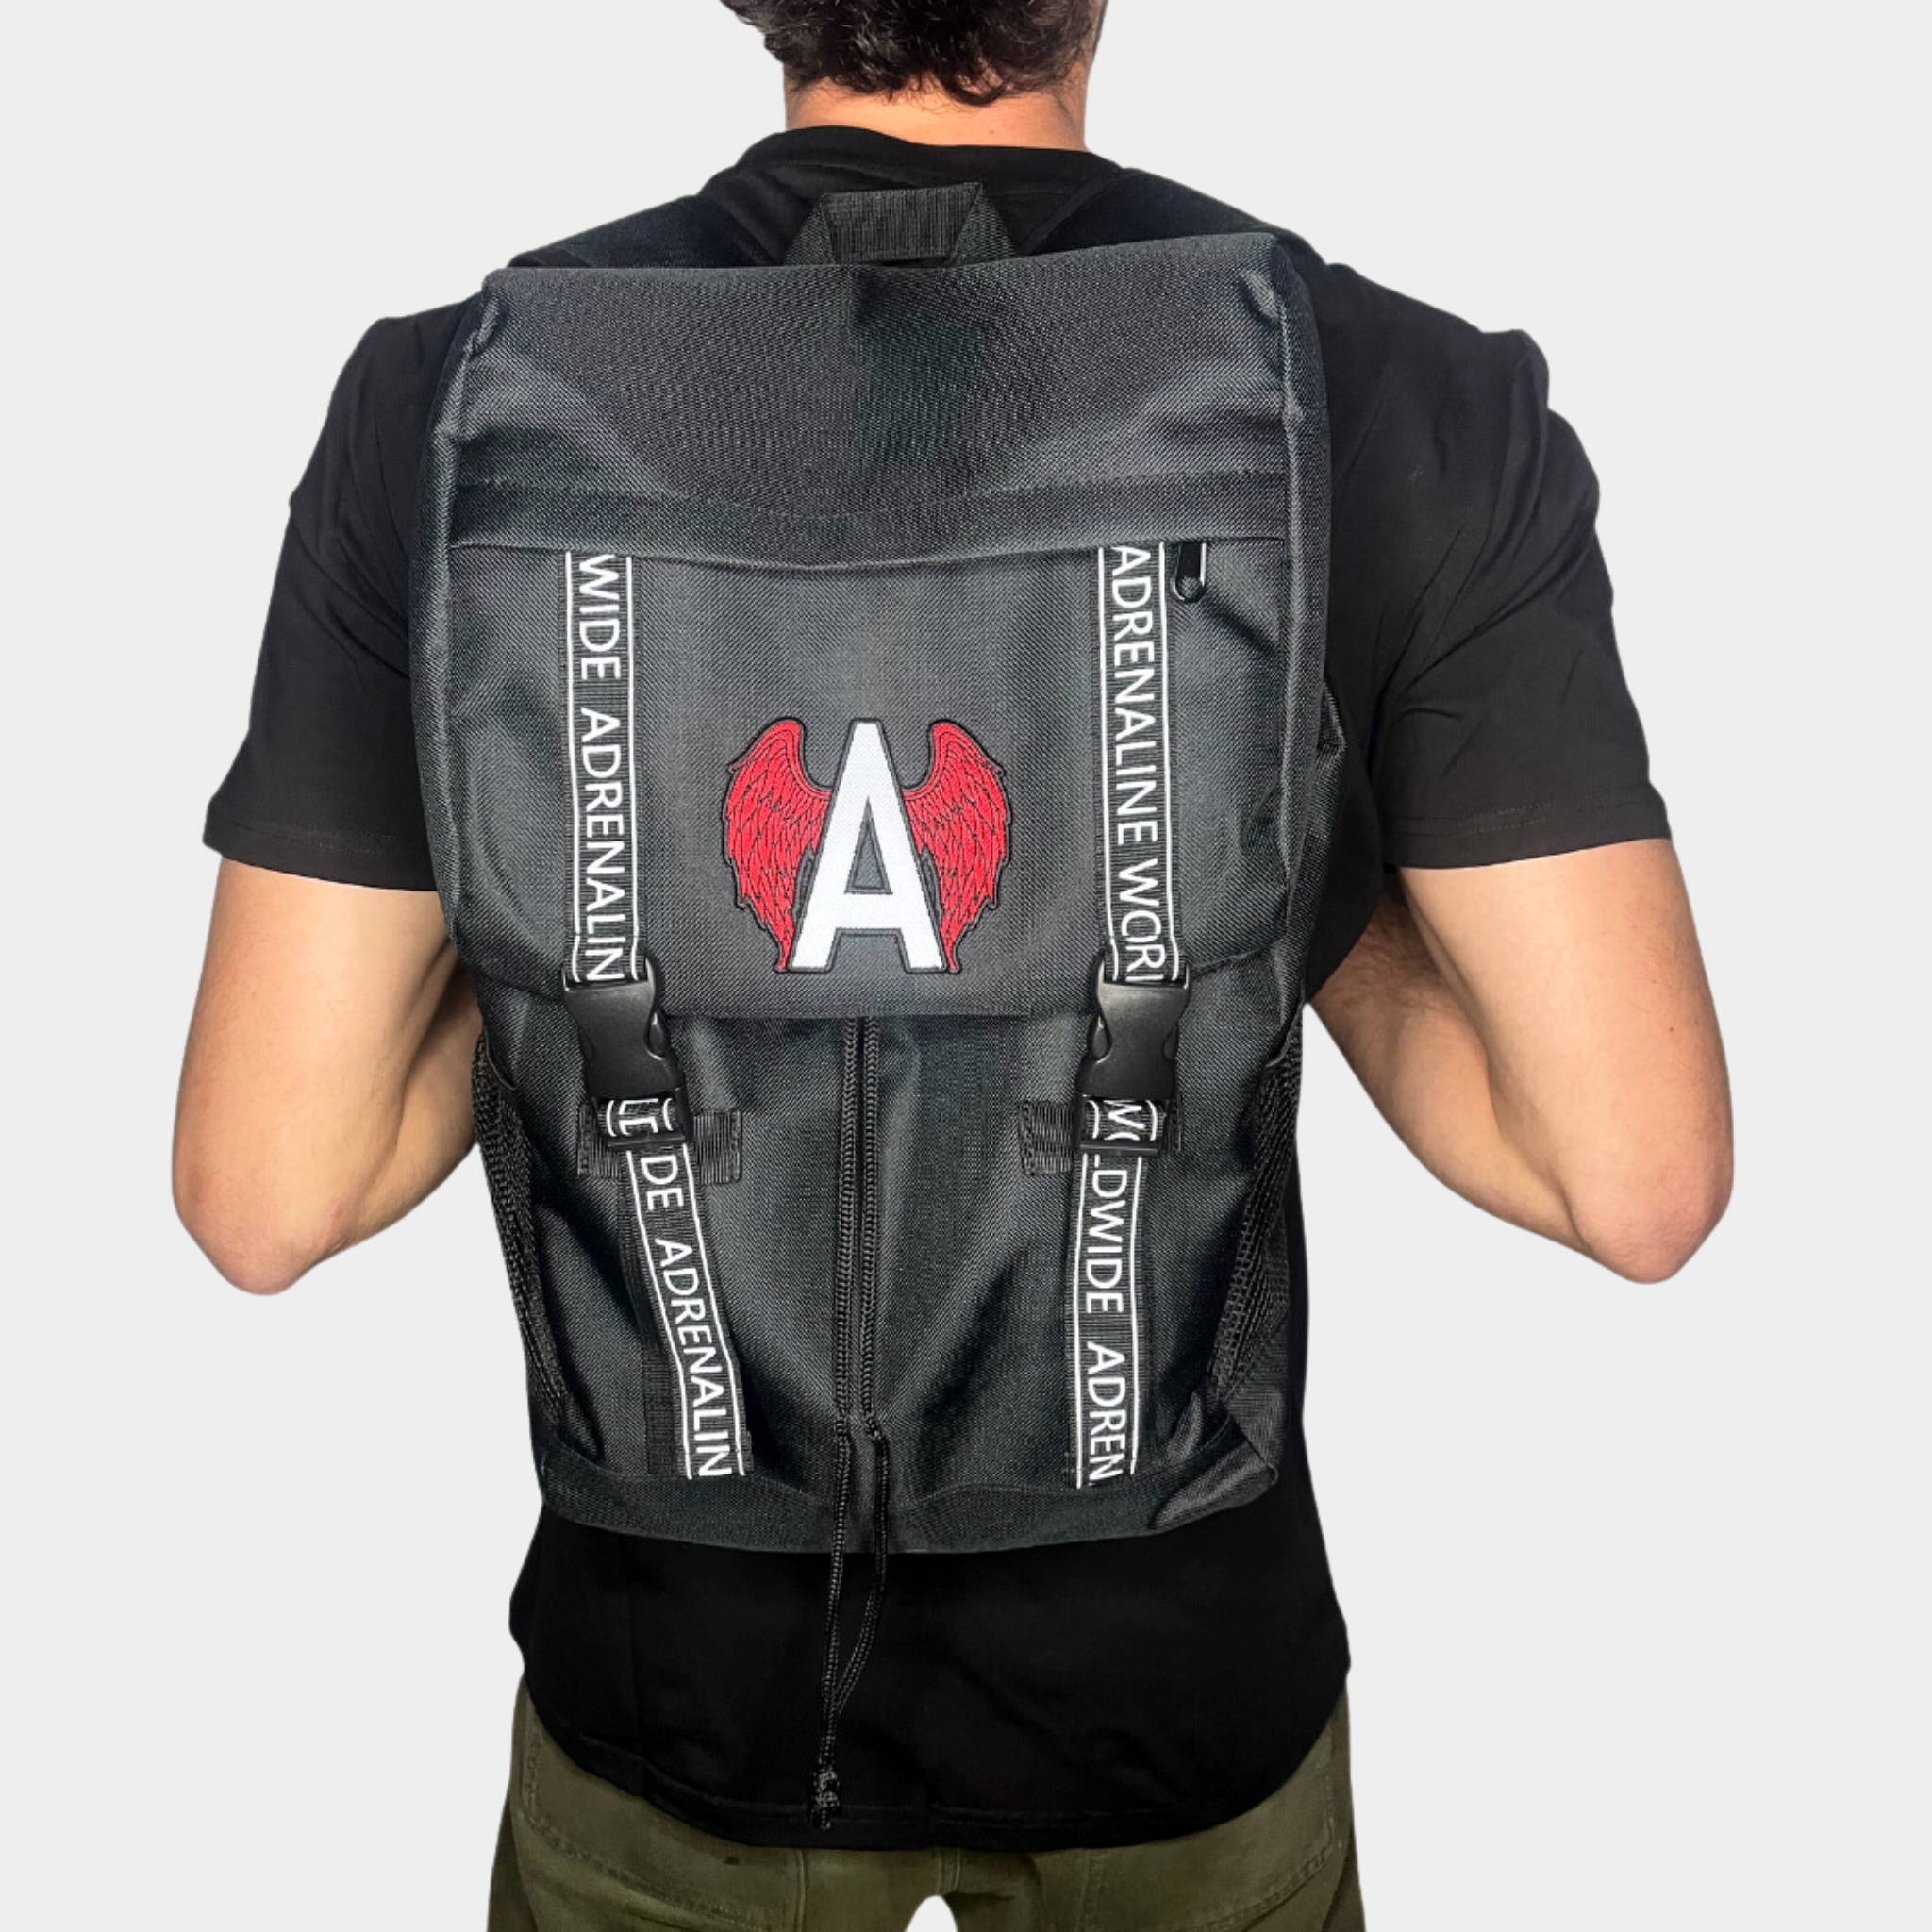 Free Pro Series Backpack